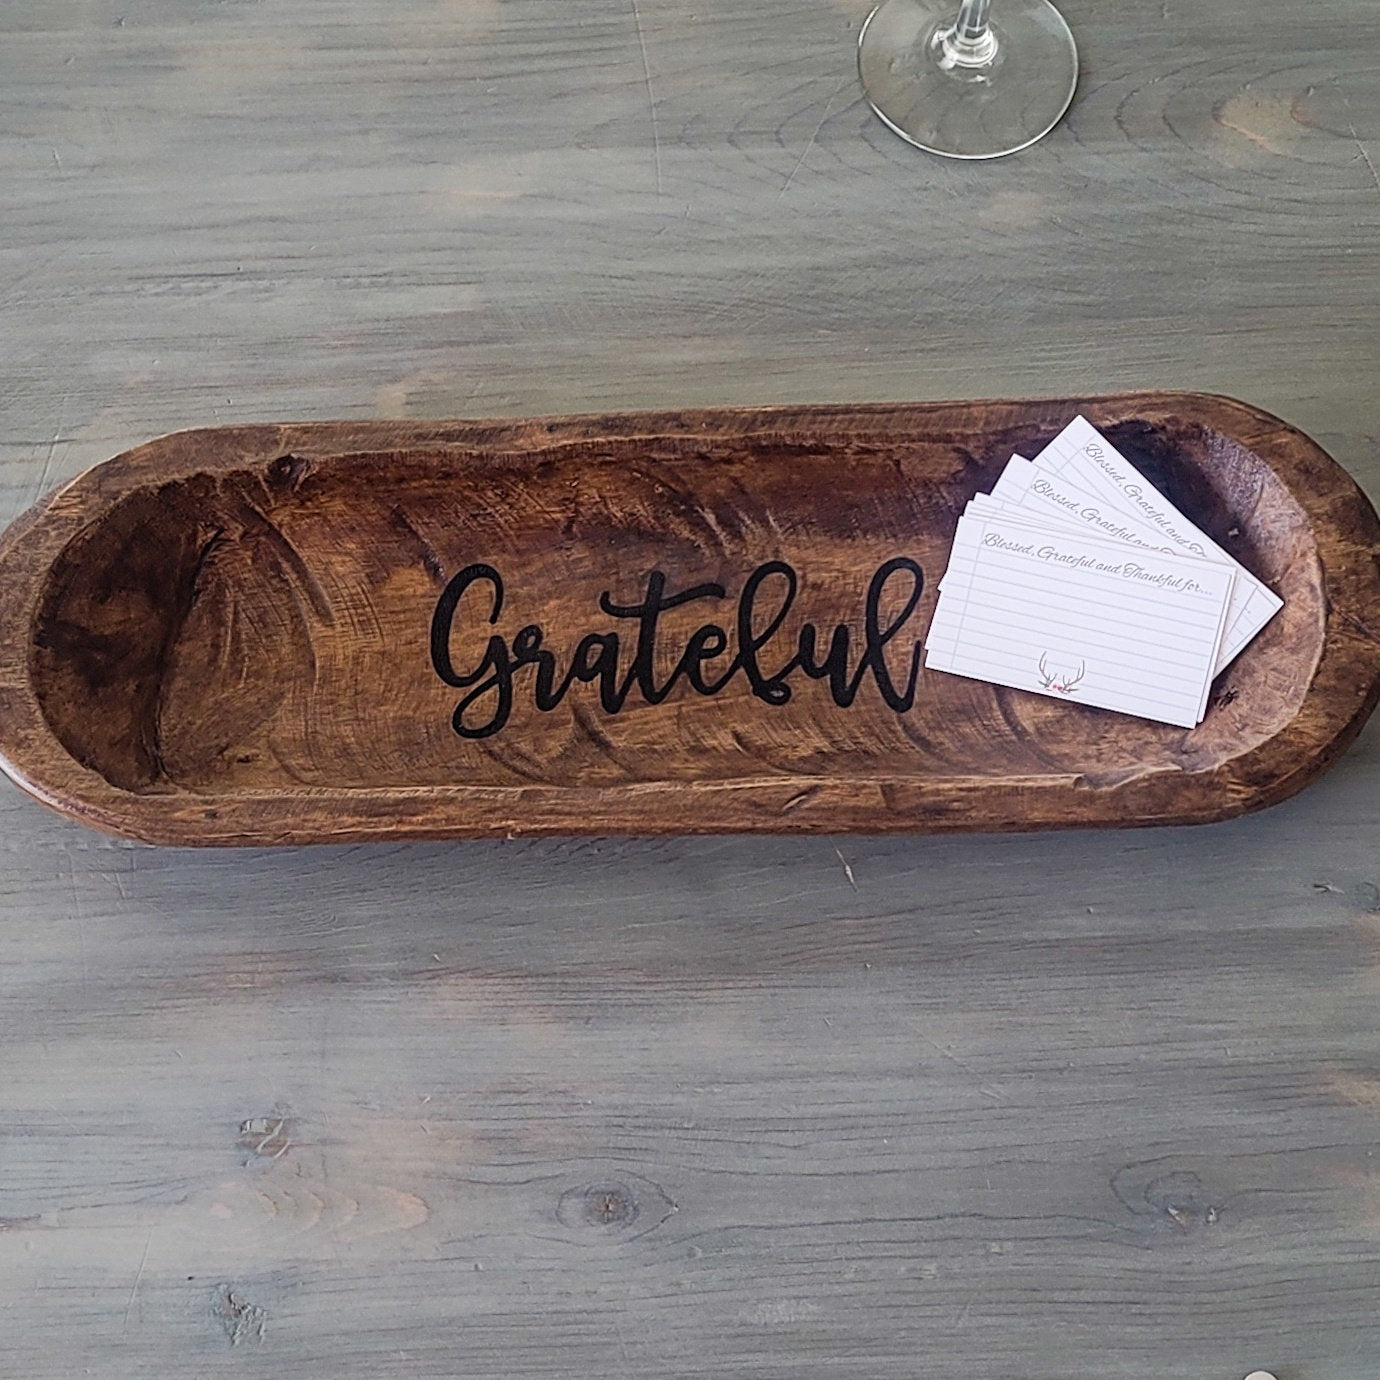 Wooden Hand Carved Dough Bowl Easter Table Setting With Blessing Gratitude Cards Easter Family Table Display